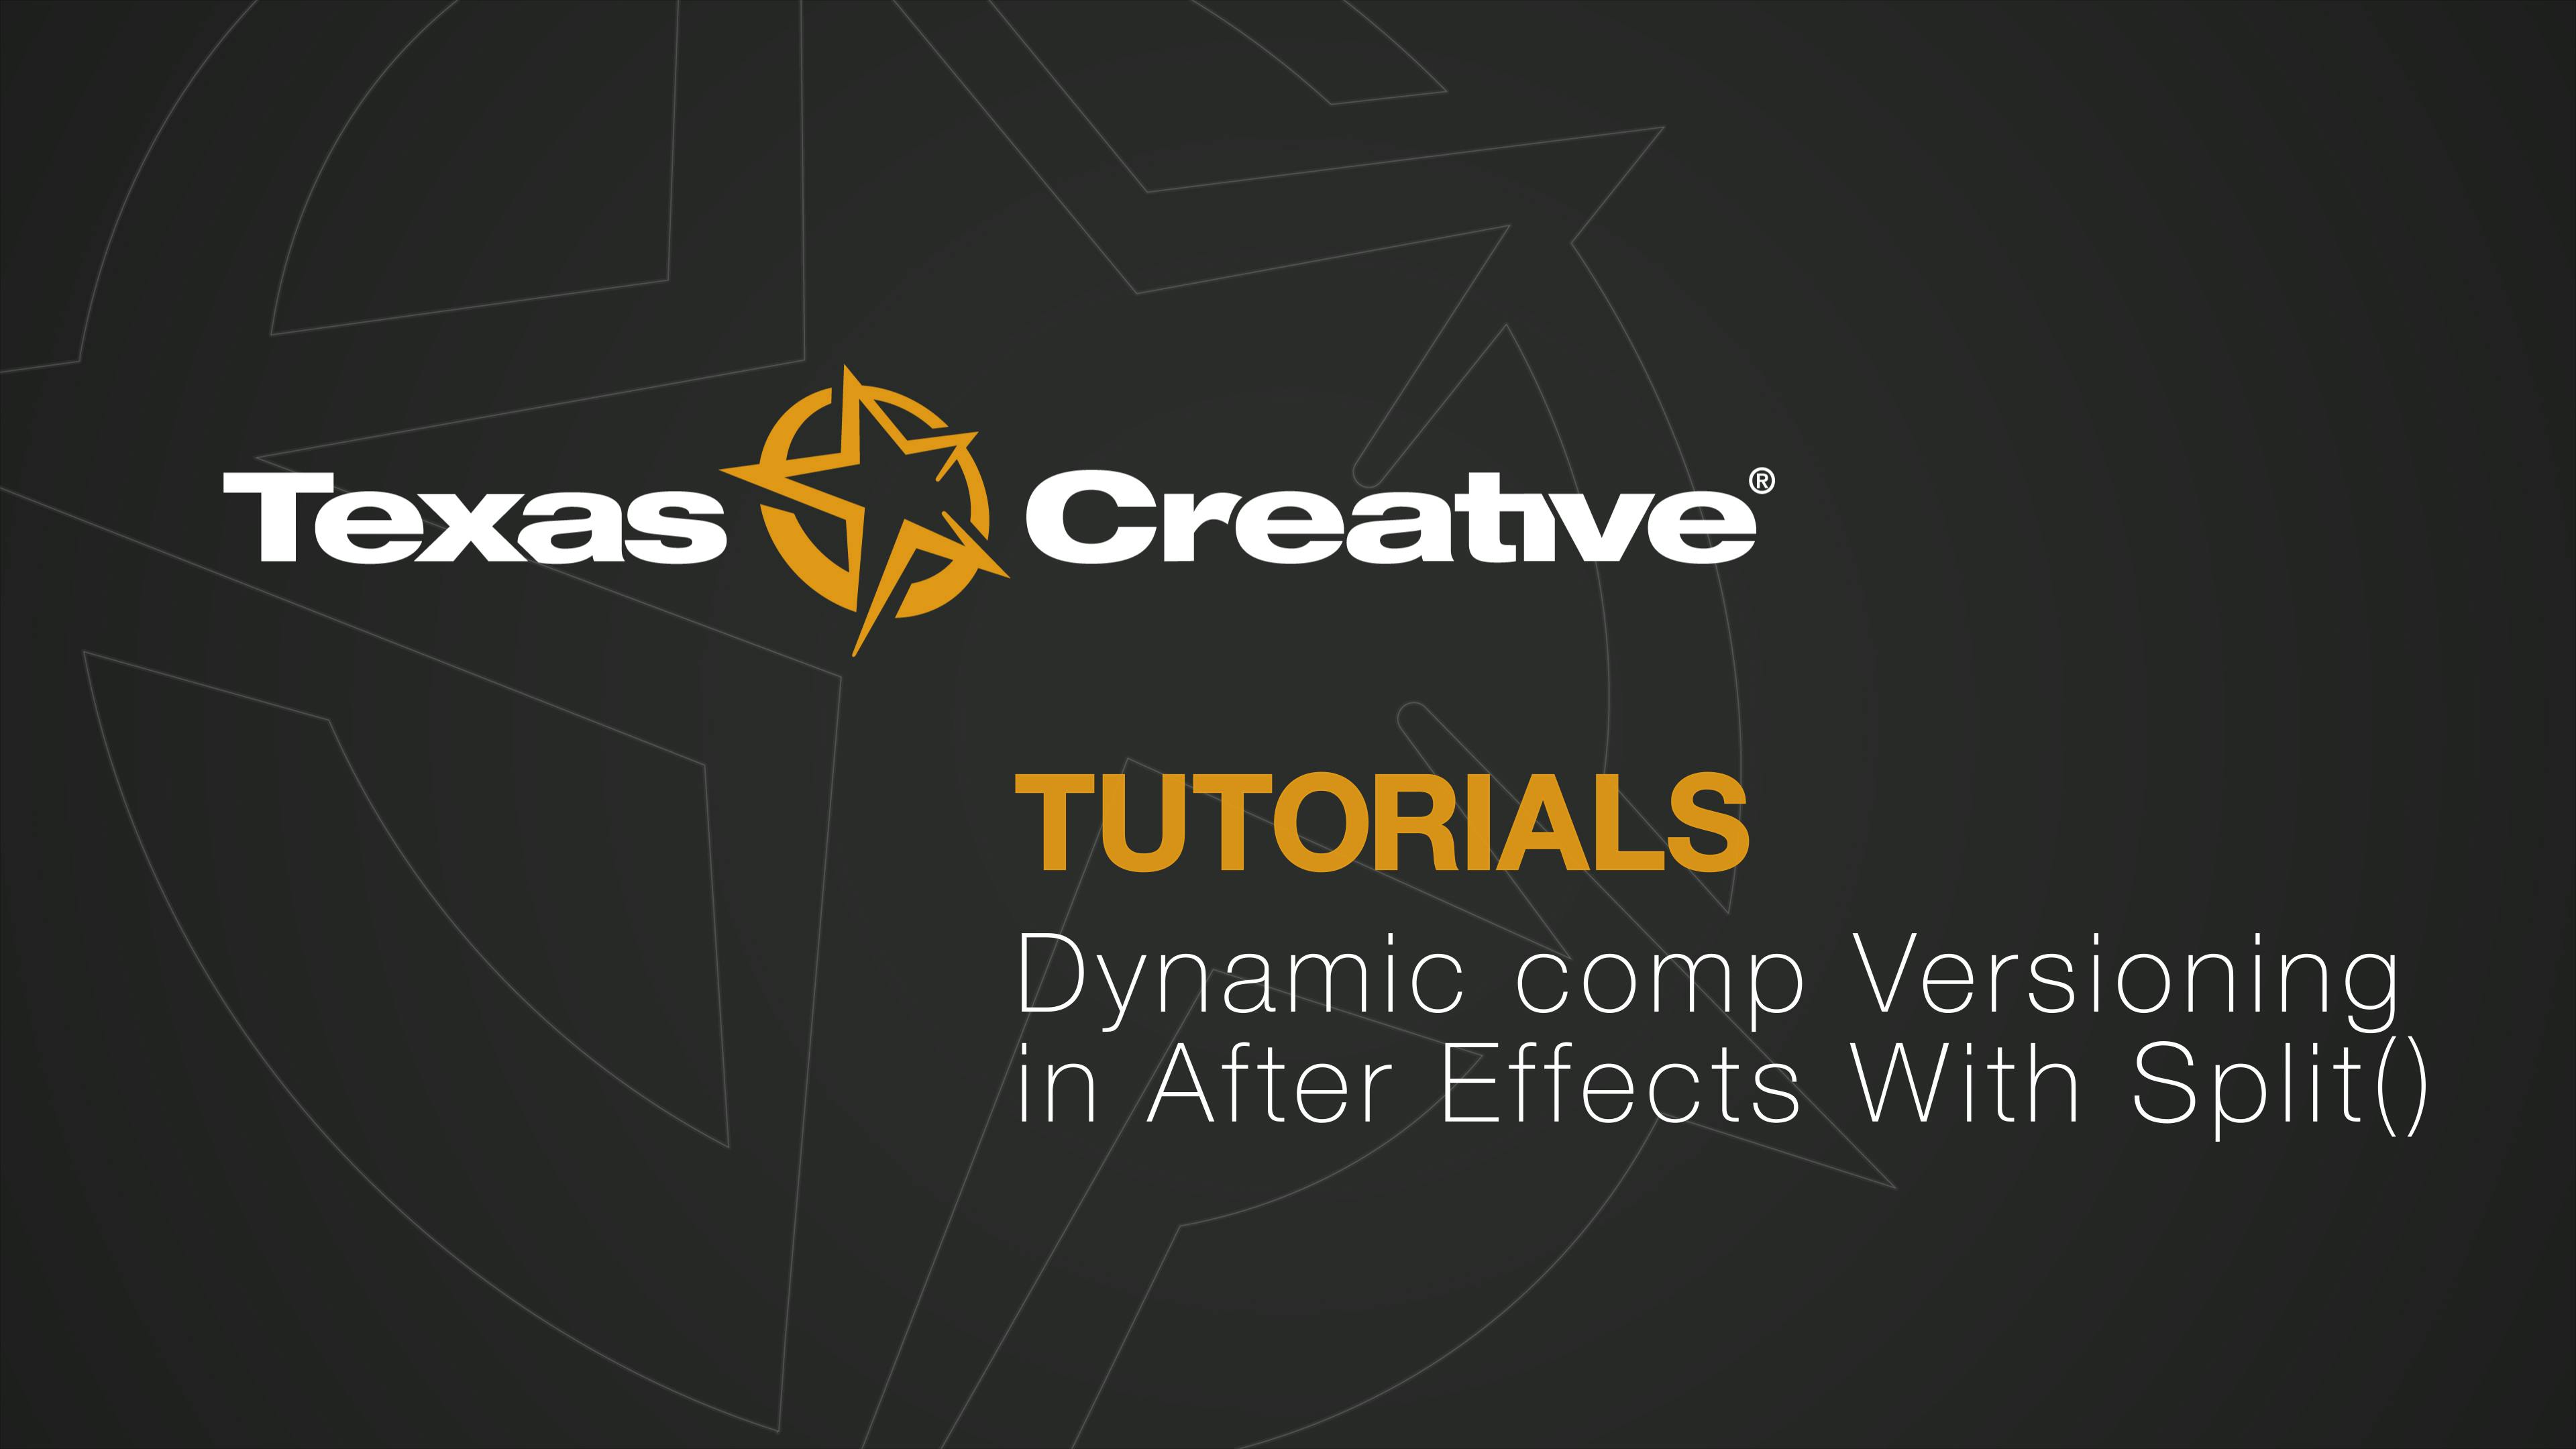 Dynamic Comps in After Effects with Split